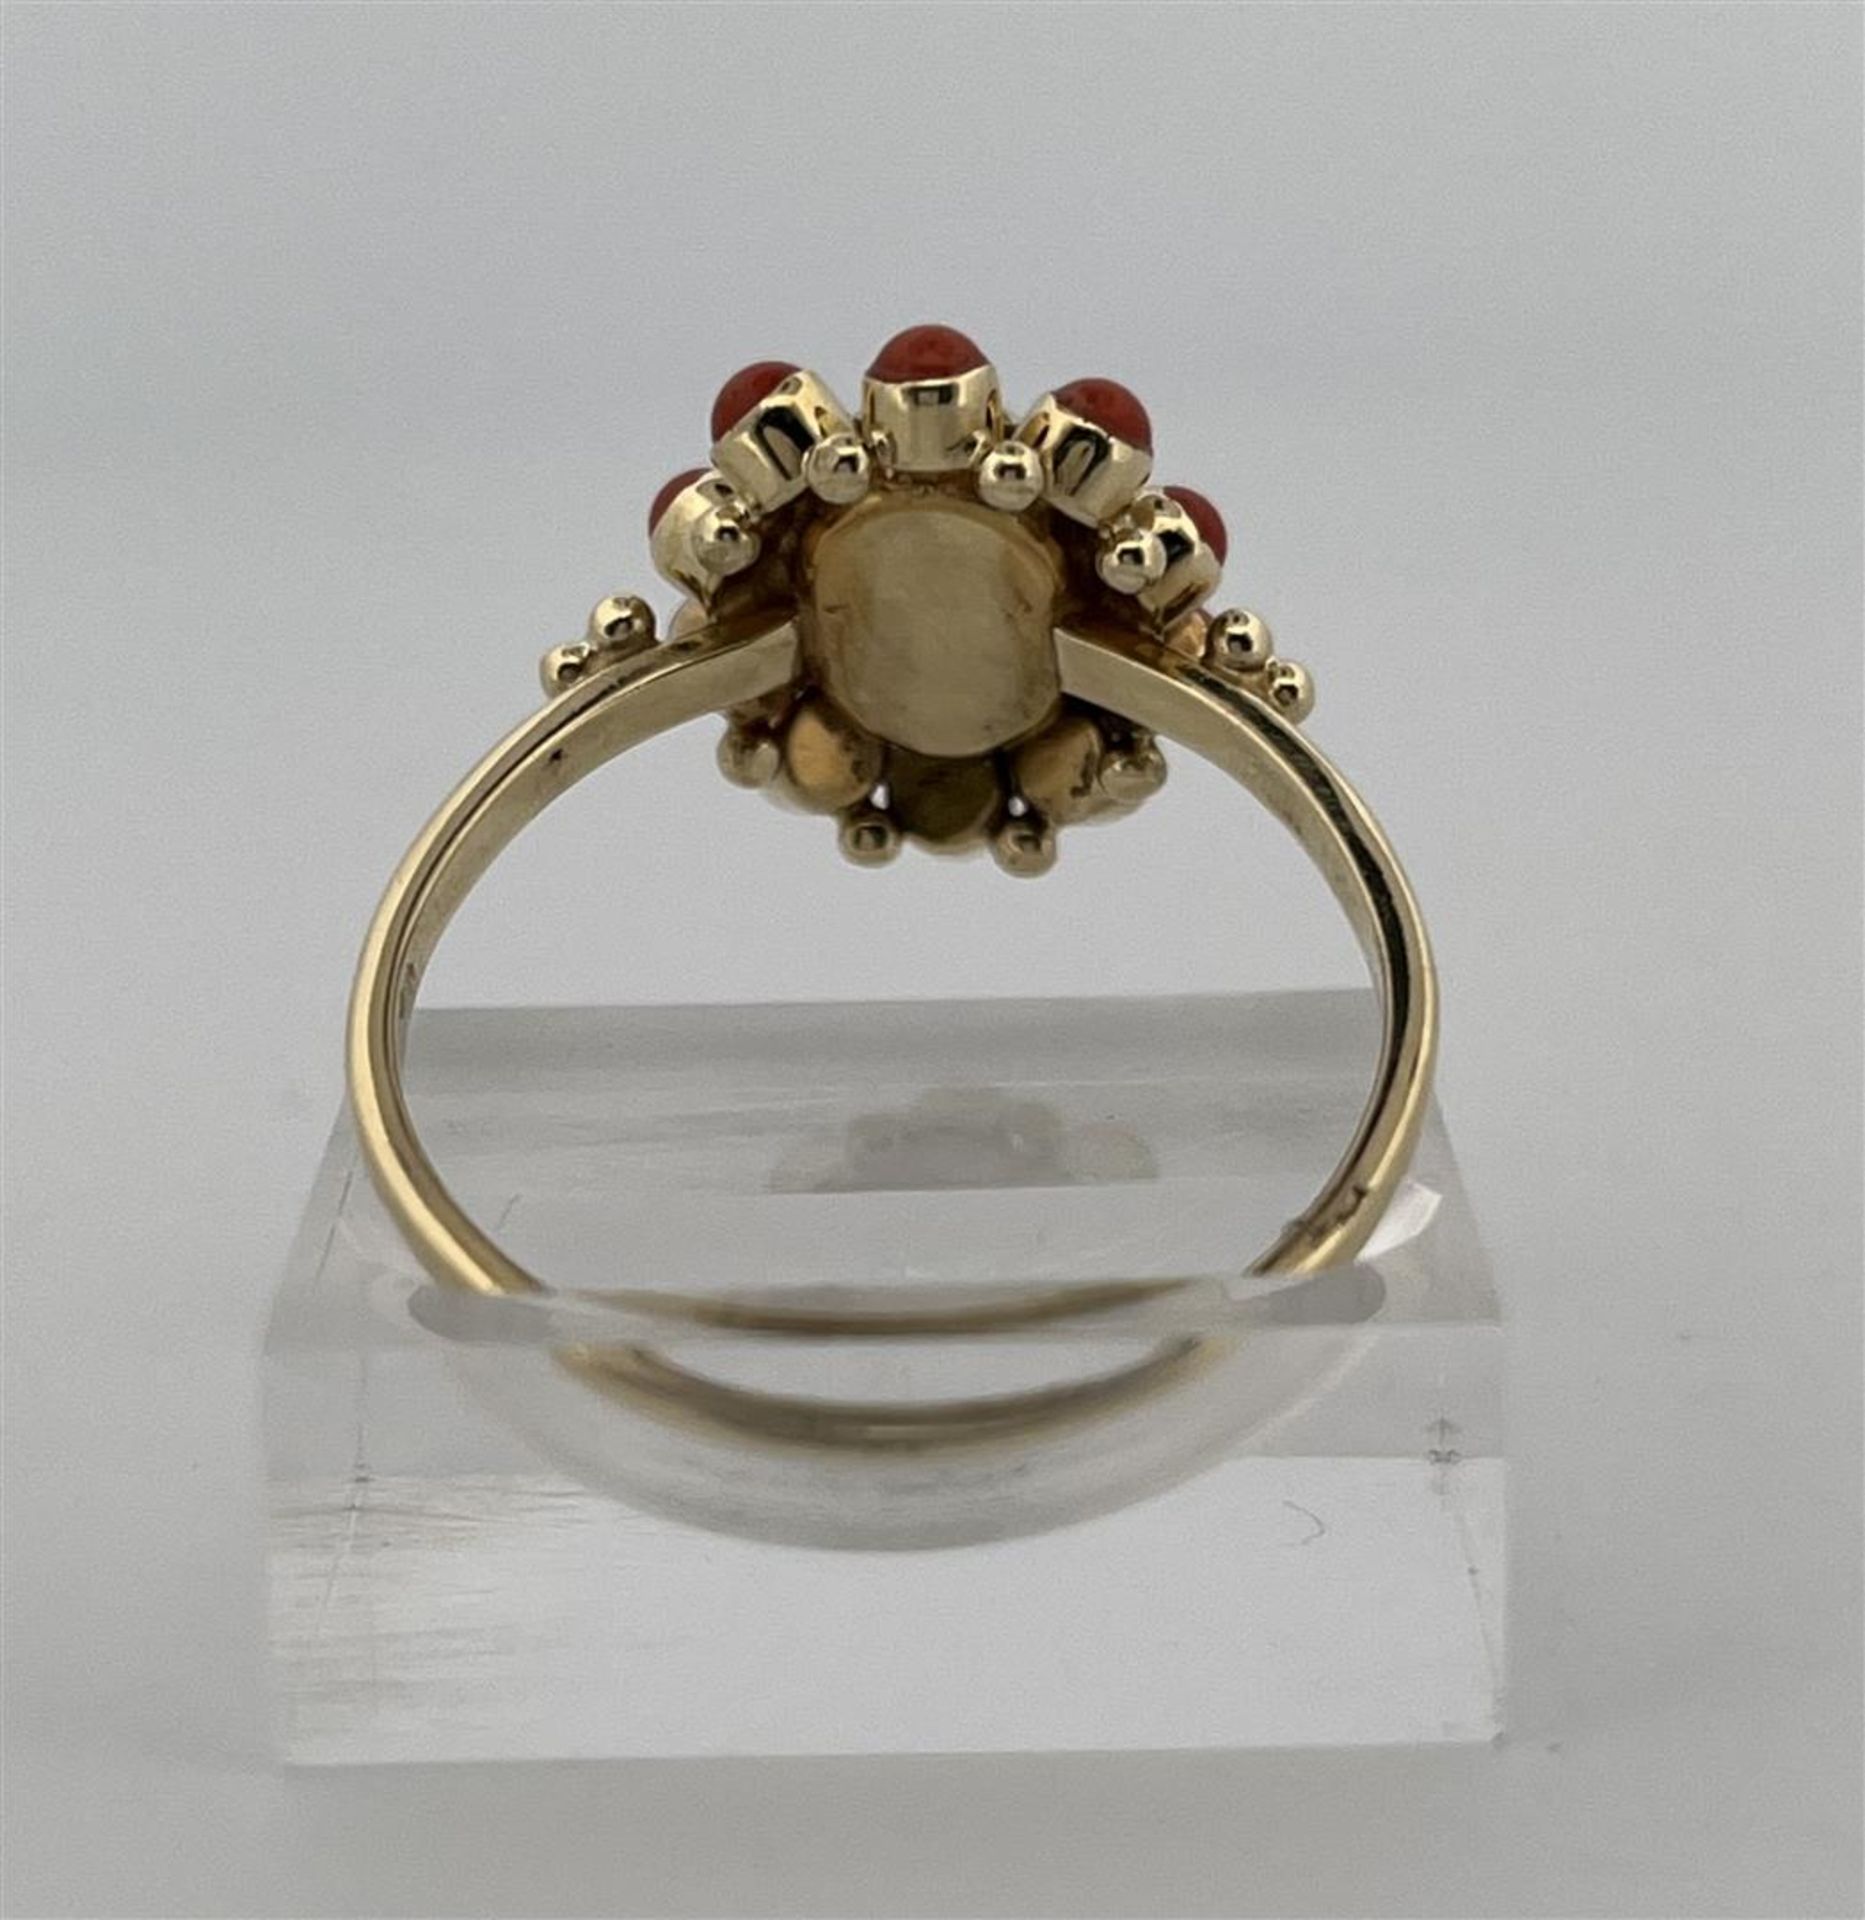 14kt yellow gold rosette ring set with red coral.
The ring is set with 1 central oval cabochon cut r - Image 5 of 7